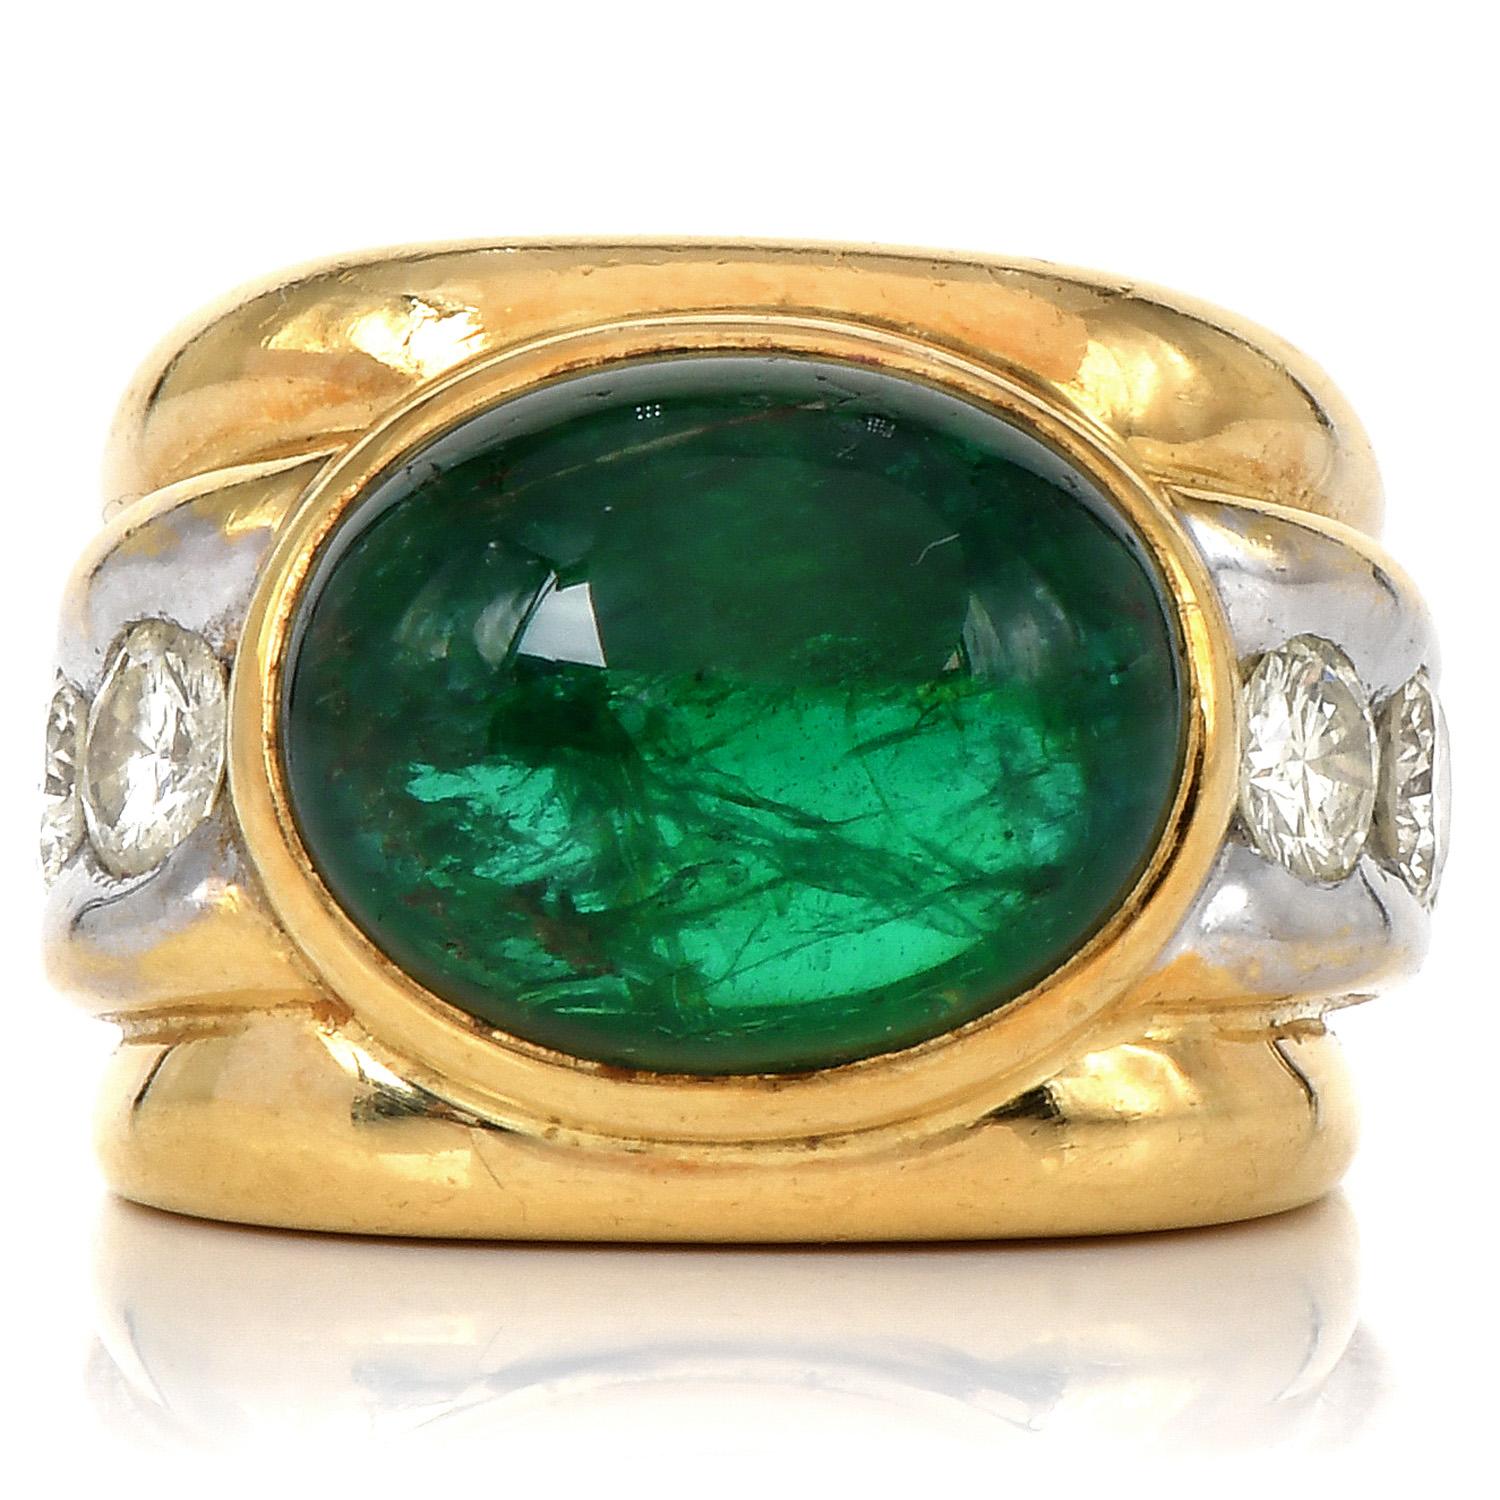 Elegant Vintage Retro 1980s Men's Ring.

Center Green genuine Emerald ring, sided with large-high-quality diamonds.

Crafted in solid 18K Yellow & White Gold, is adorned by a Cabochon Oval cut, Genuine Emerald, bezel-set, measuring 14.88 x 11.76 x